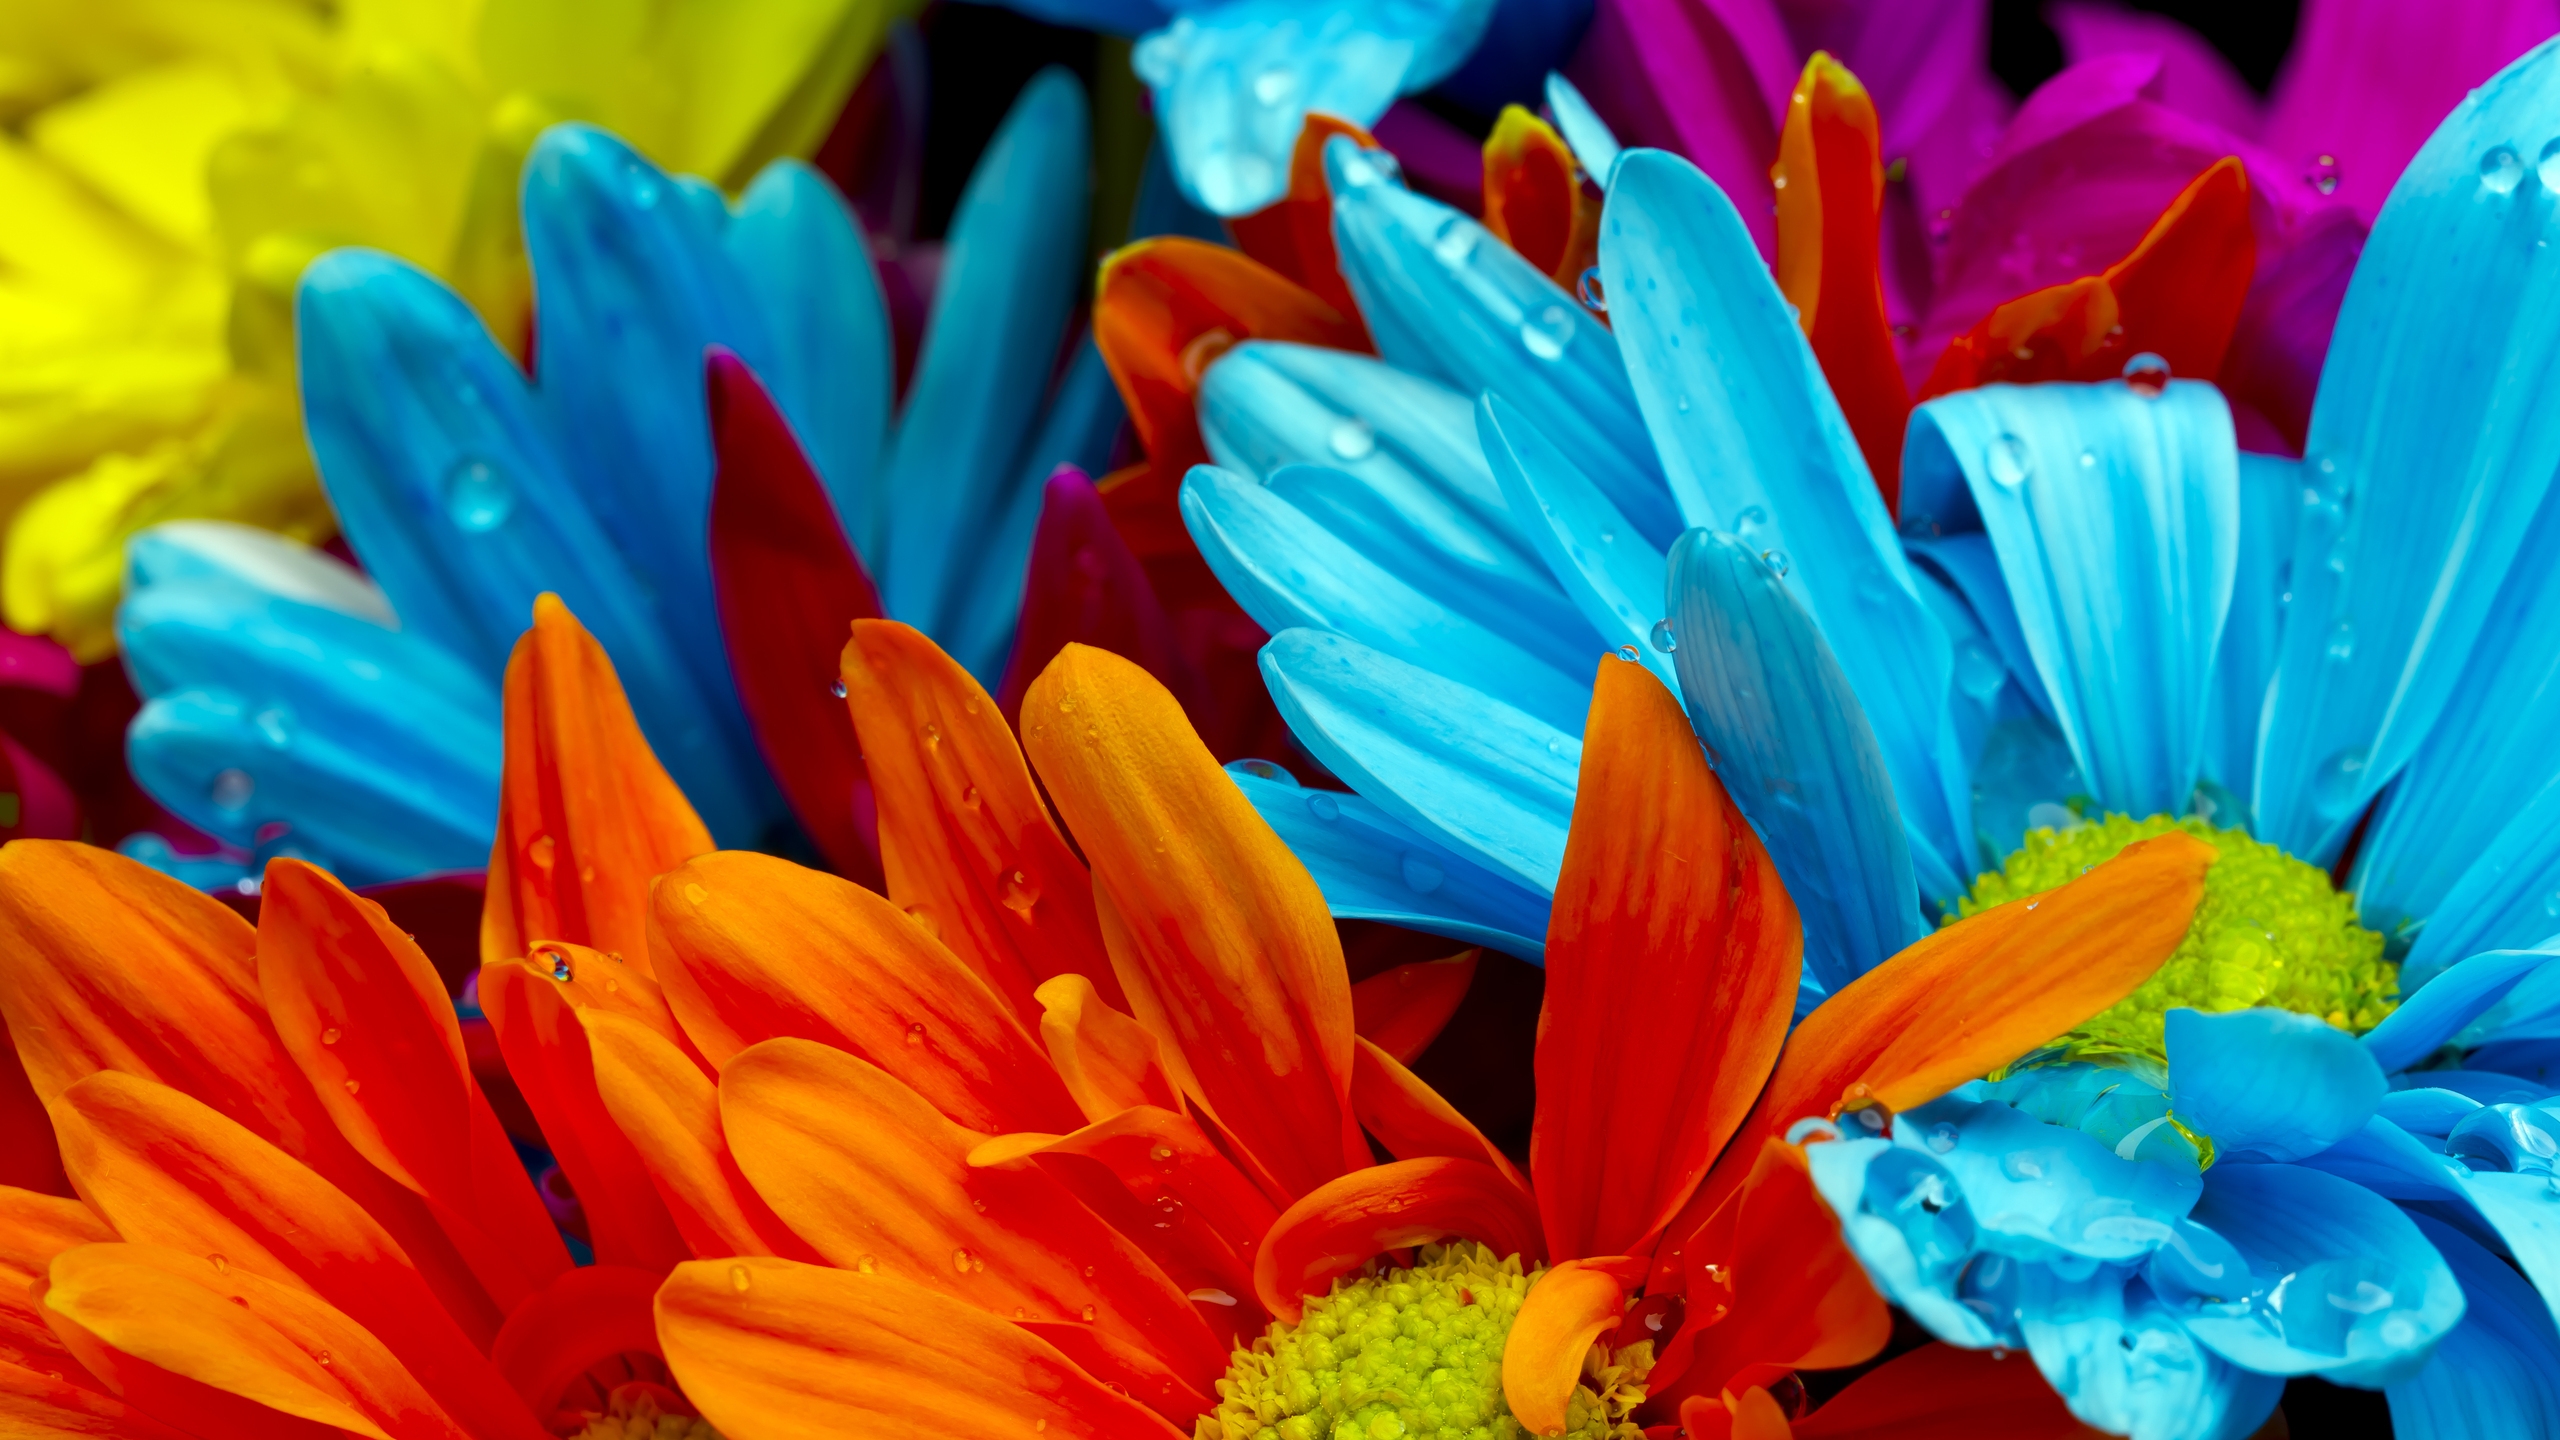 Amazing Flower Colors for 2560x1440 HDTV resolution